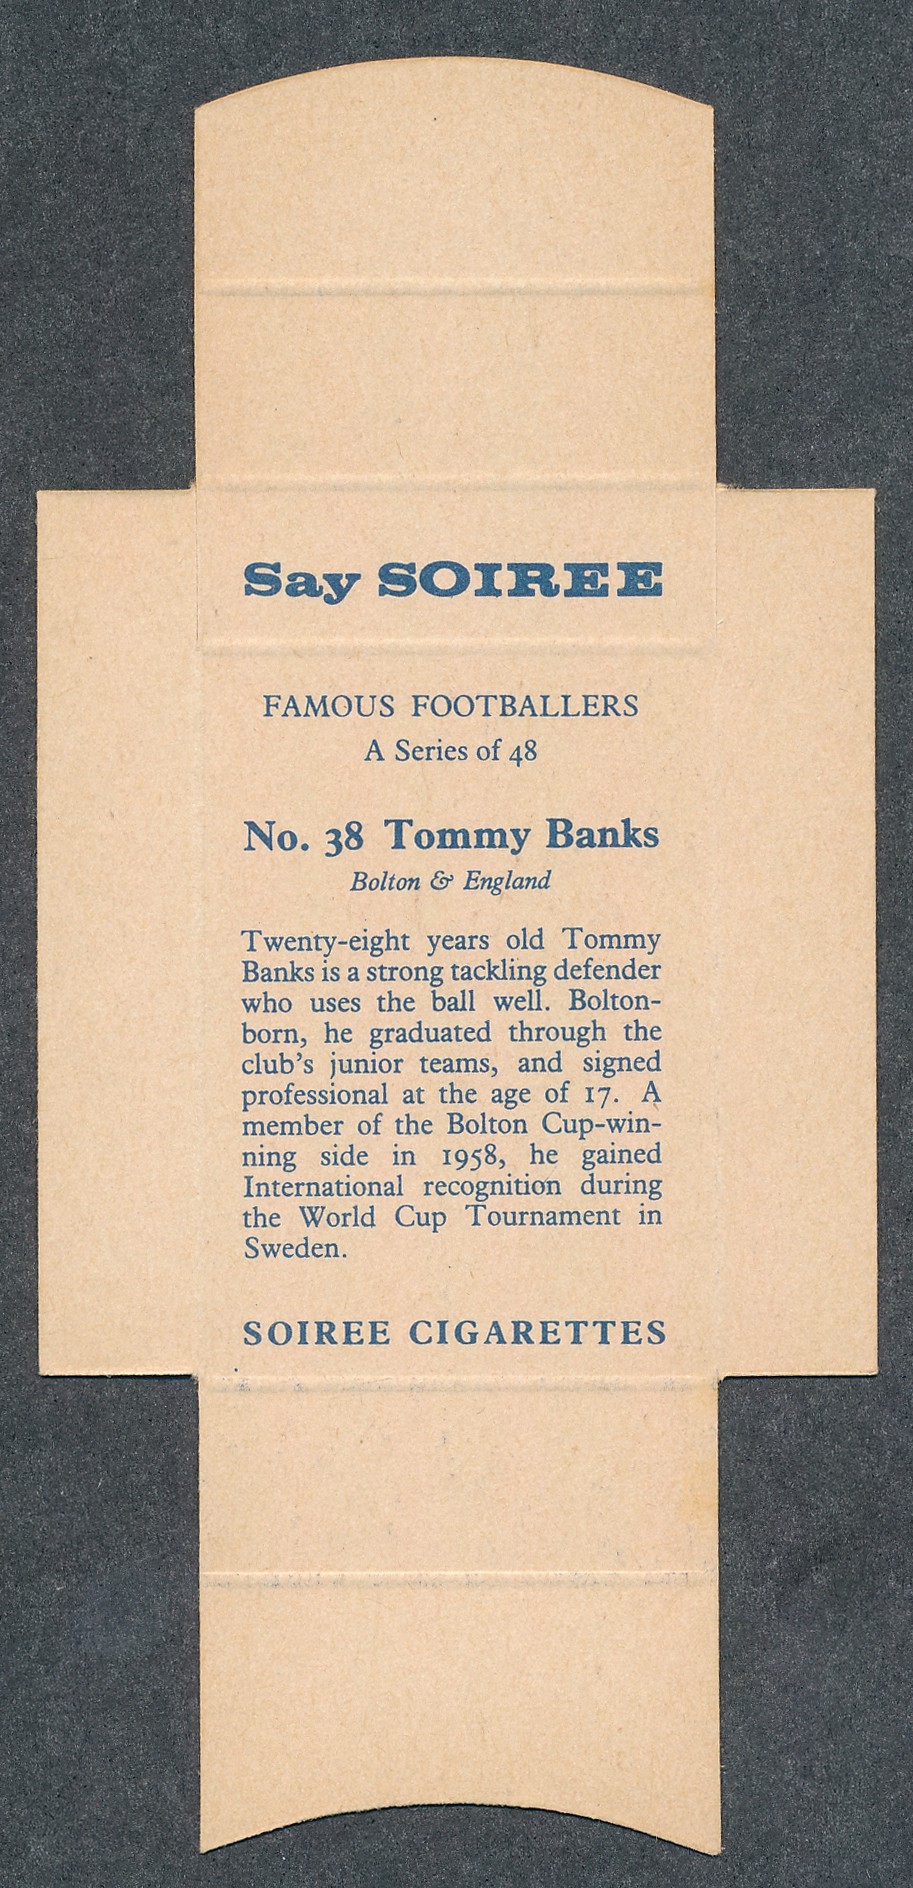 Soiree Cigarettes, Mauritius, Famous Footballers uncut packet issue, No.38 Tommy Banks, Bolton & - Image 2 of 2